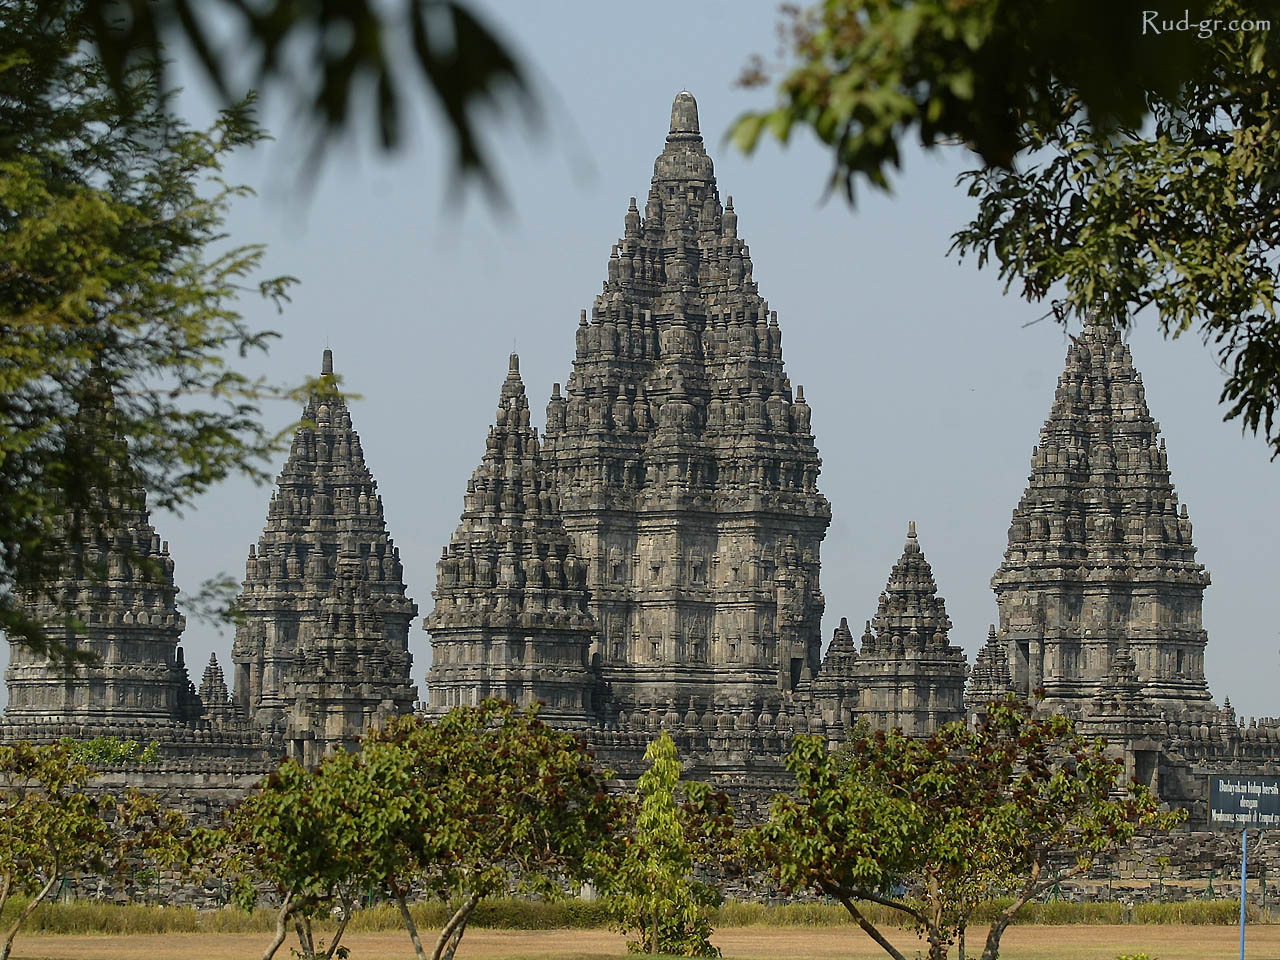 A-Z April Challenge – P Is For Prambanan In Indonesia